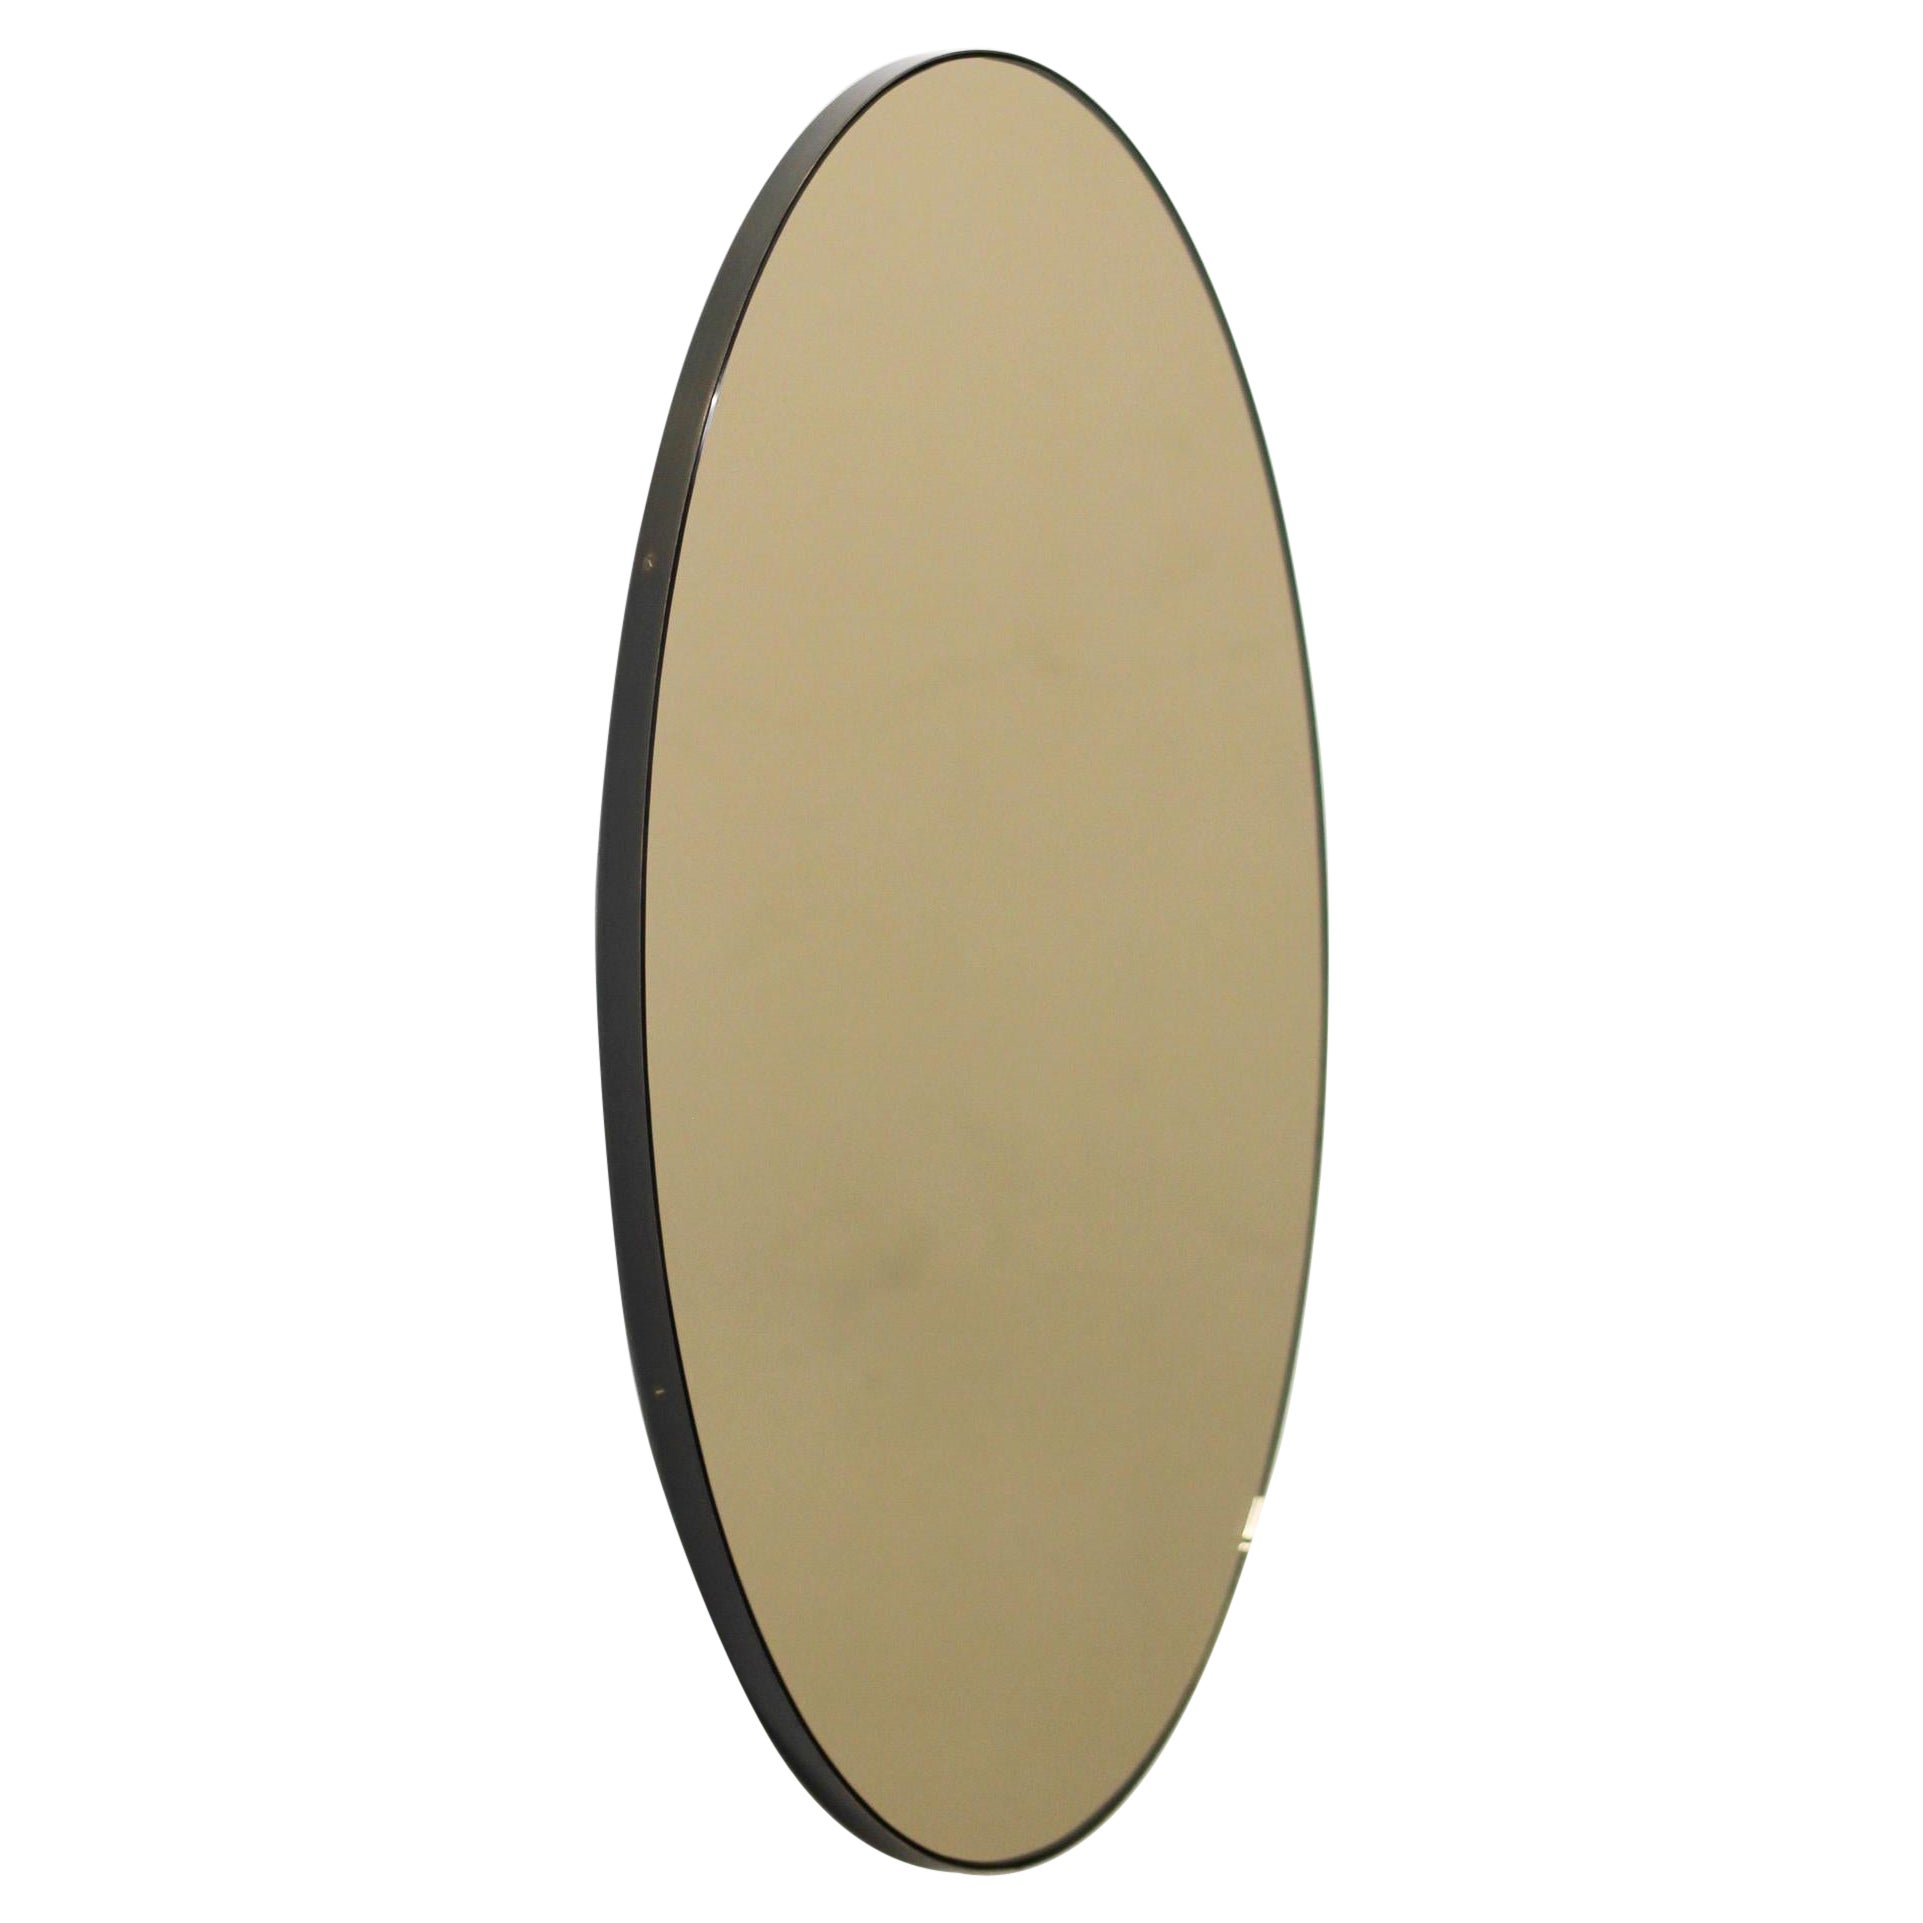 Ovalis Oval Bronze Tinted Contemporary Mirror with Patina Frame, XL For Sale